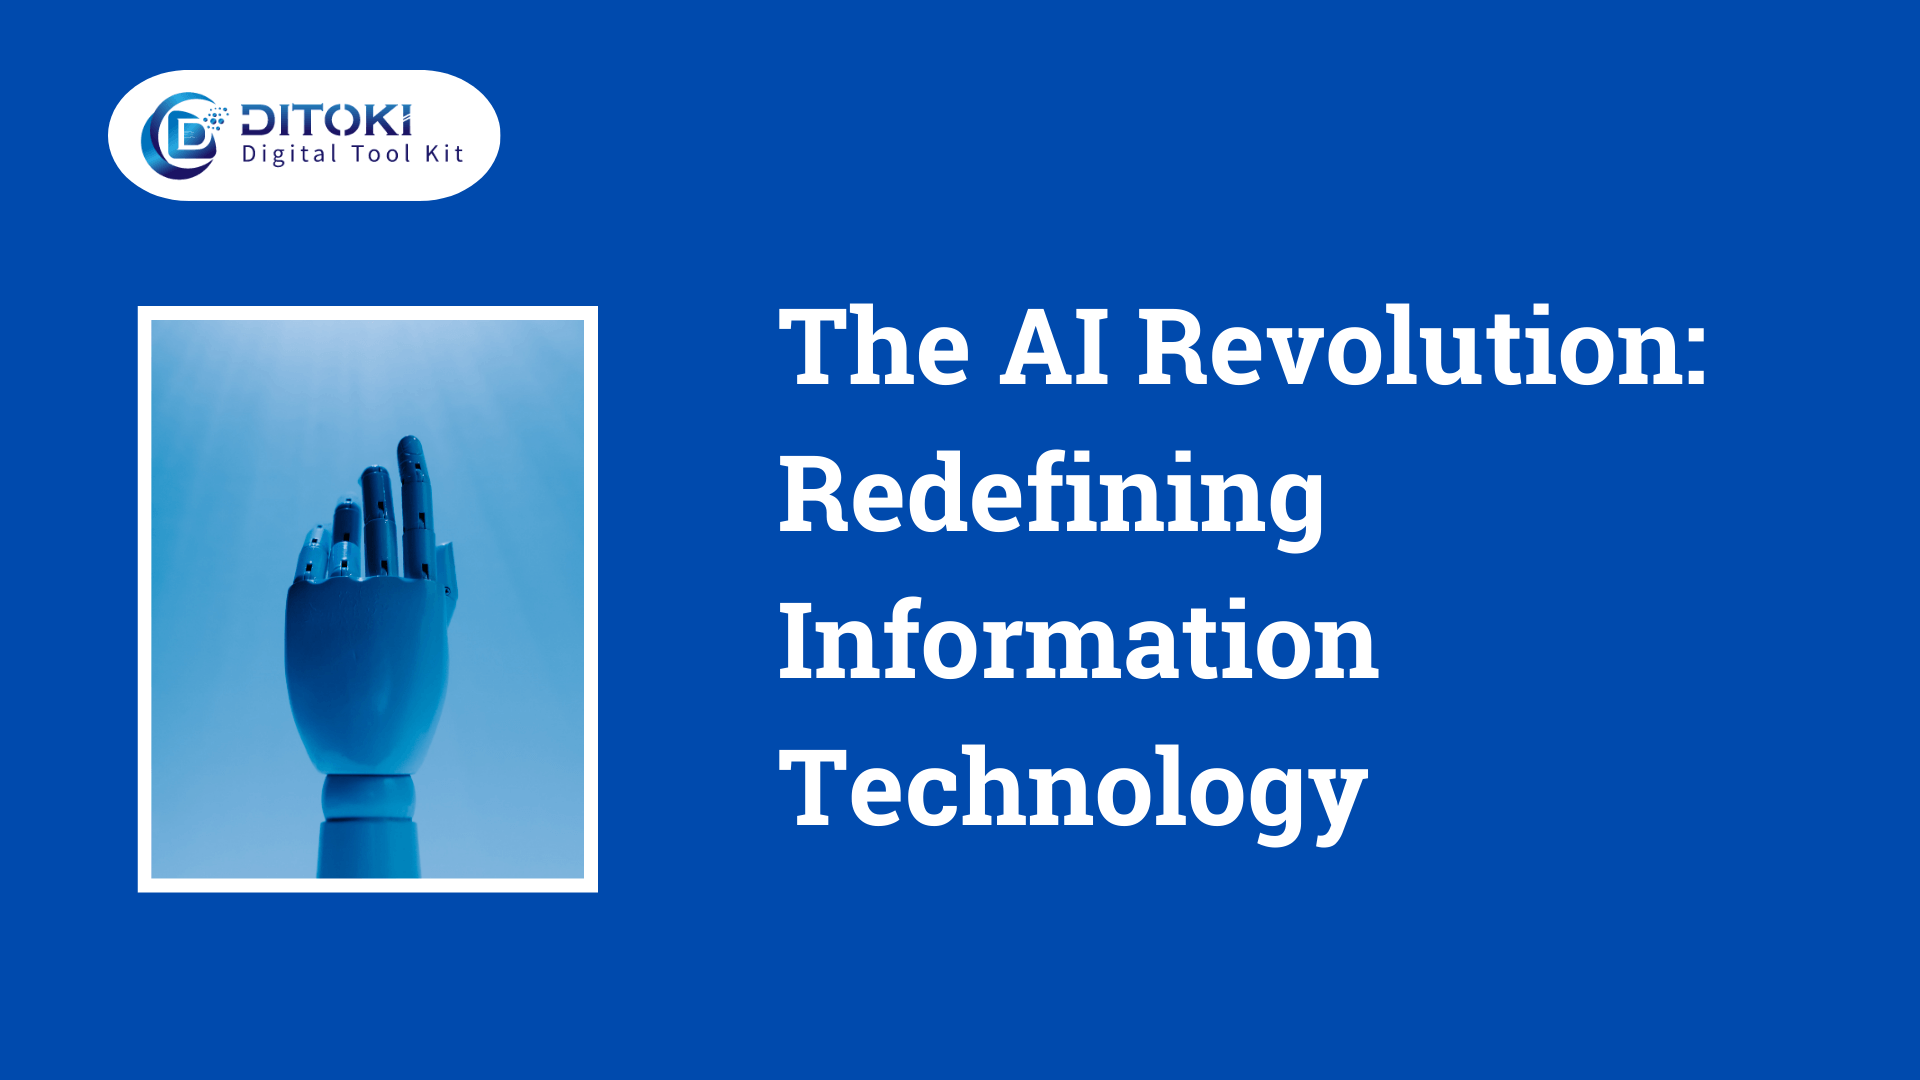 The AI Revolution: Redefining Information Technology